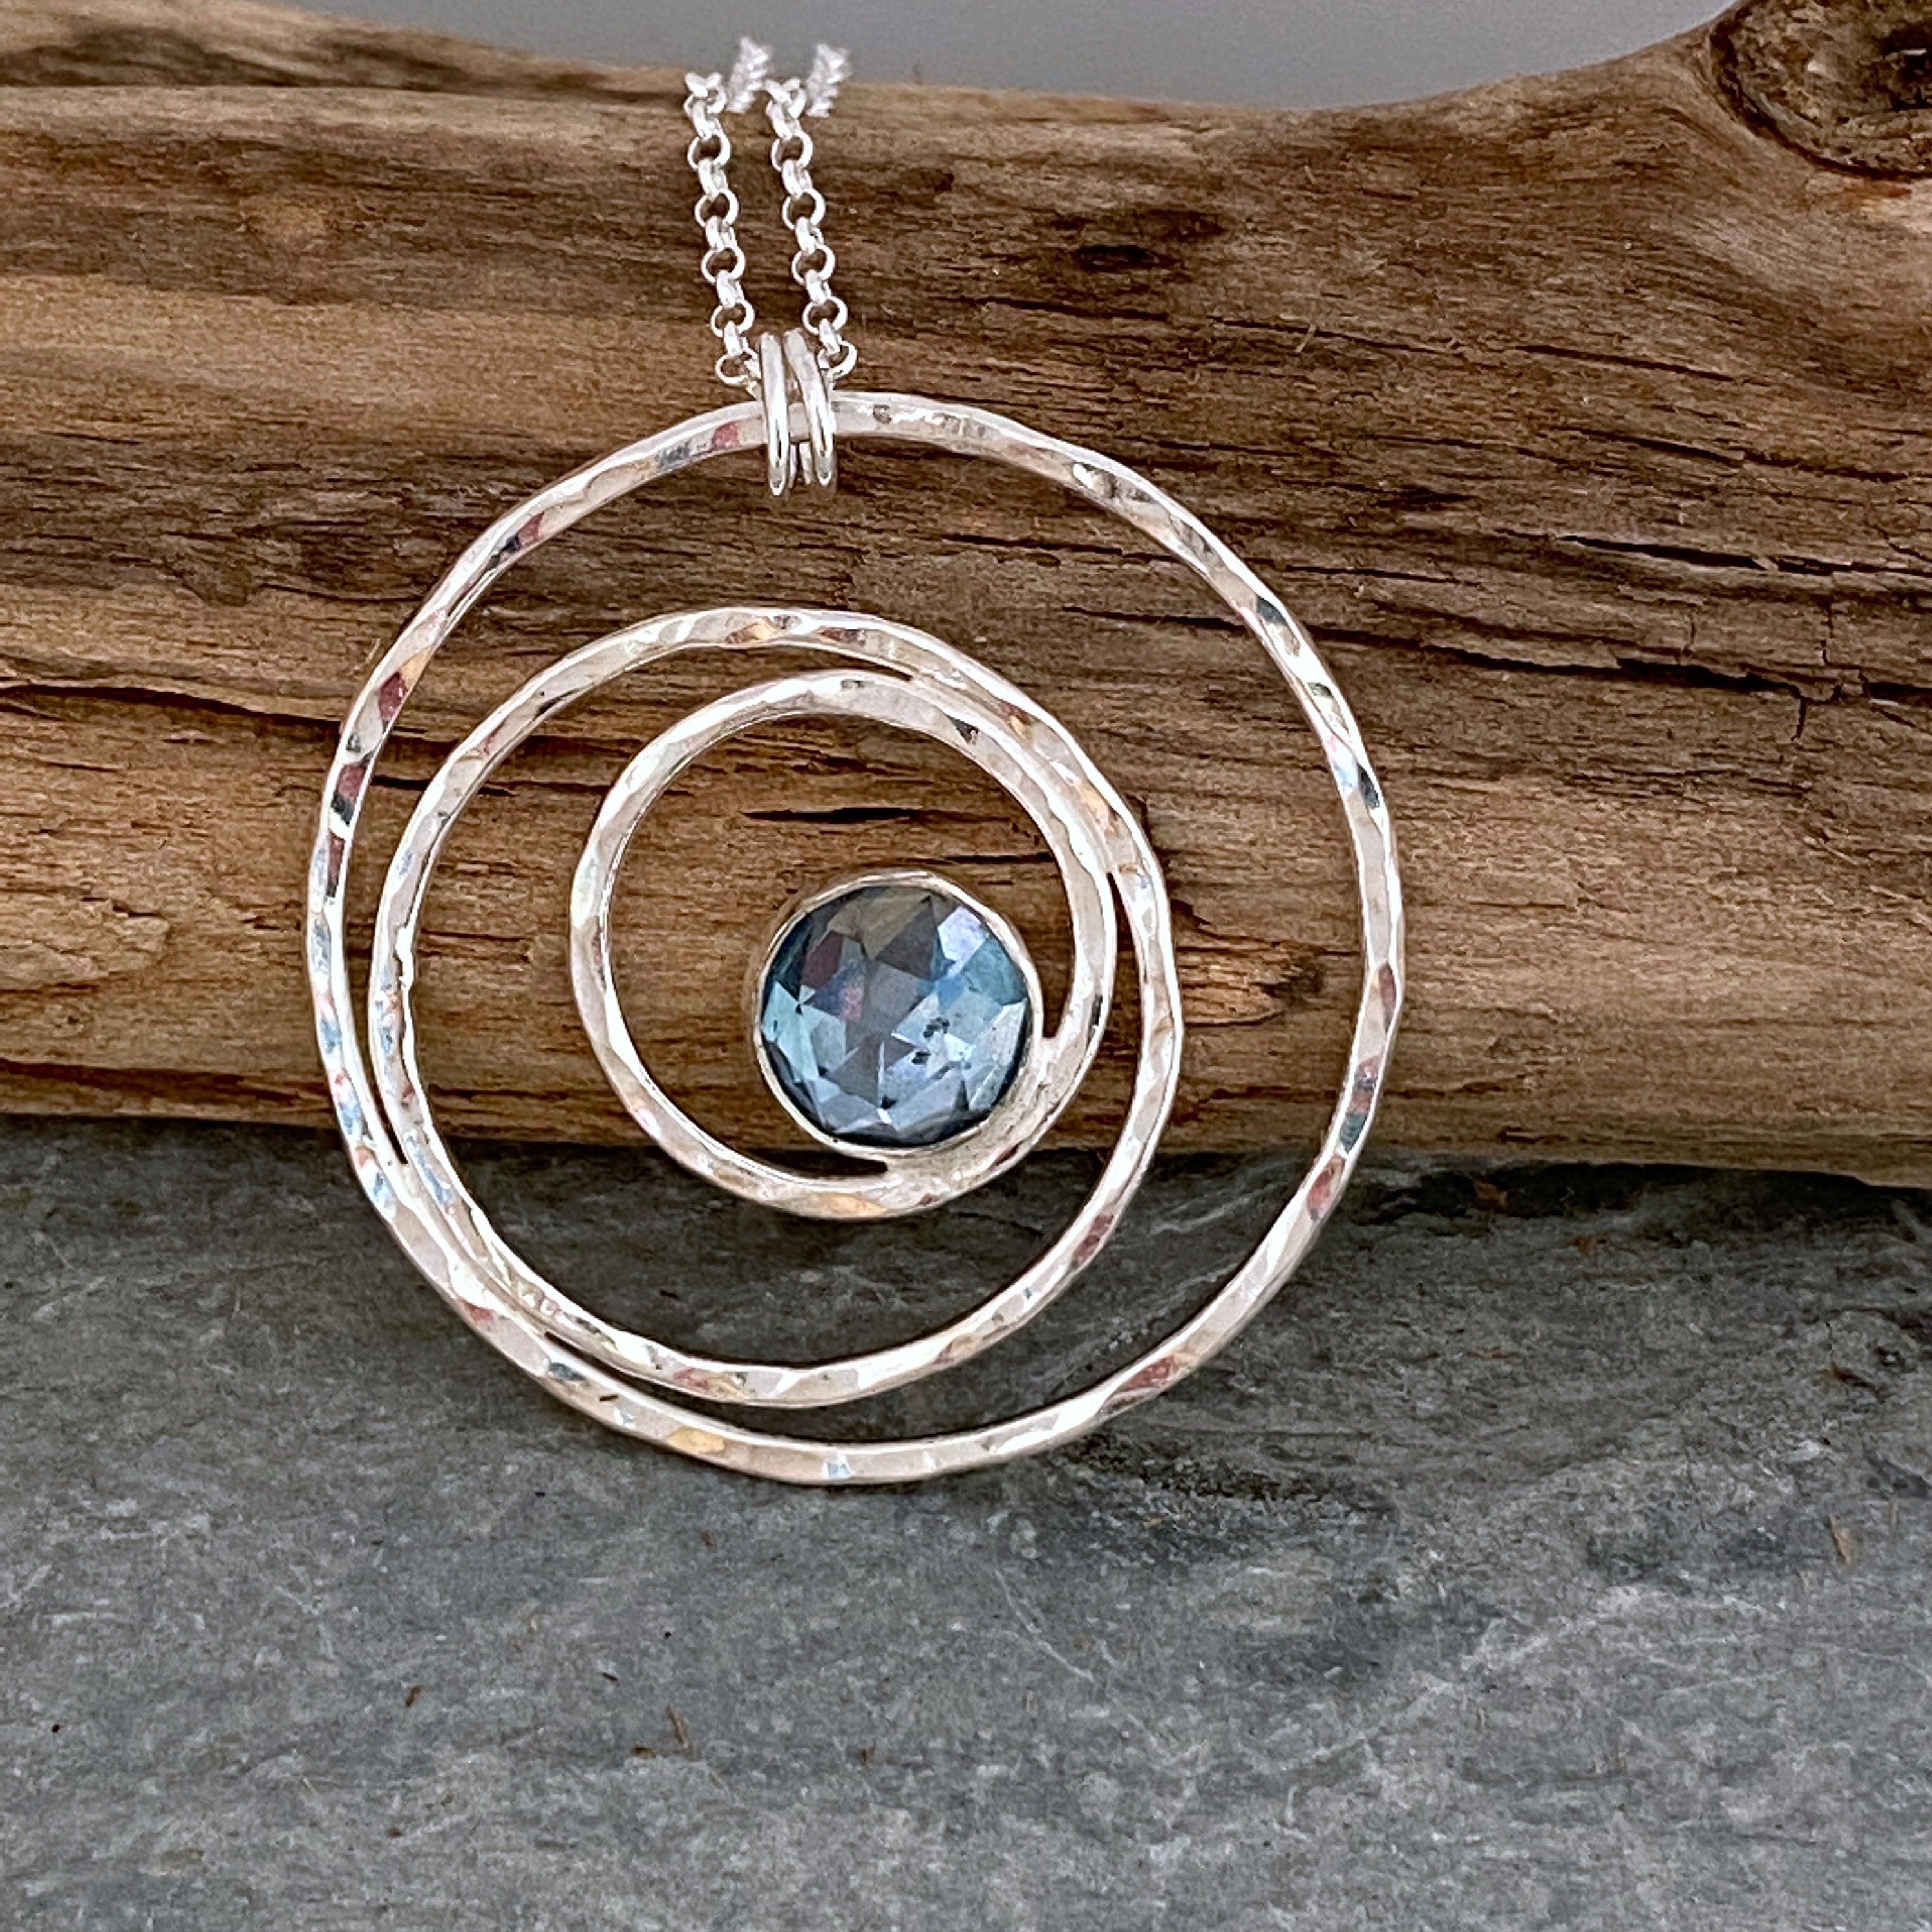 Silver Circles Necklace Set With A Blue Topaz Gemstone, Hanging On Sterling Silver Chain